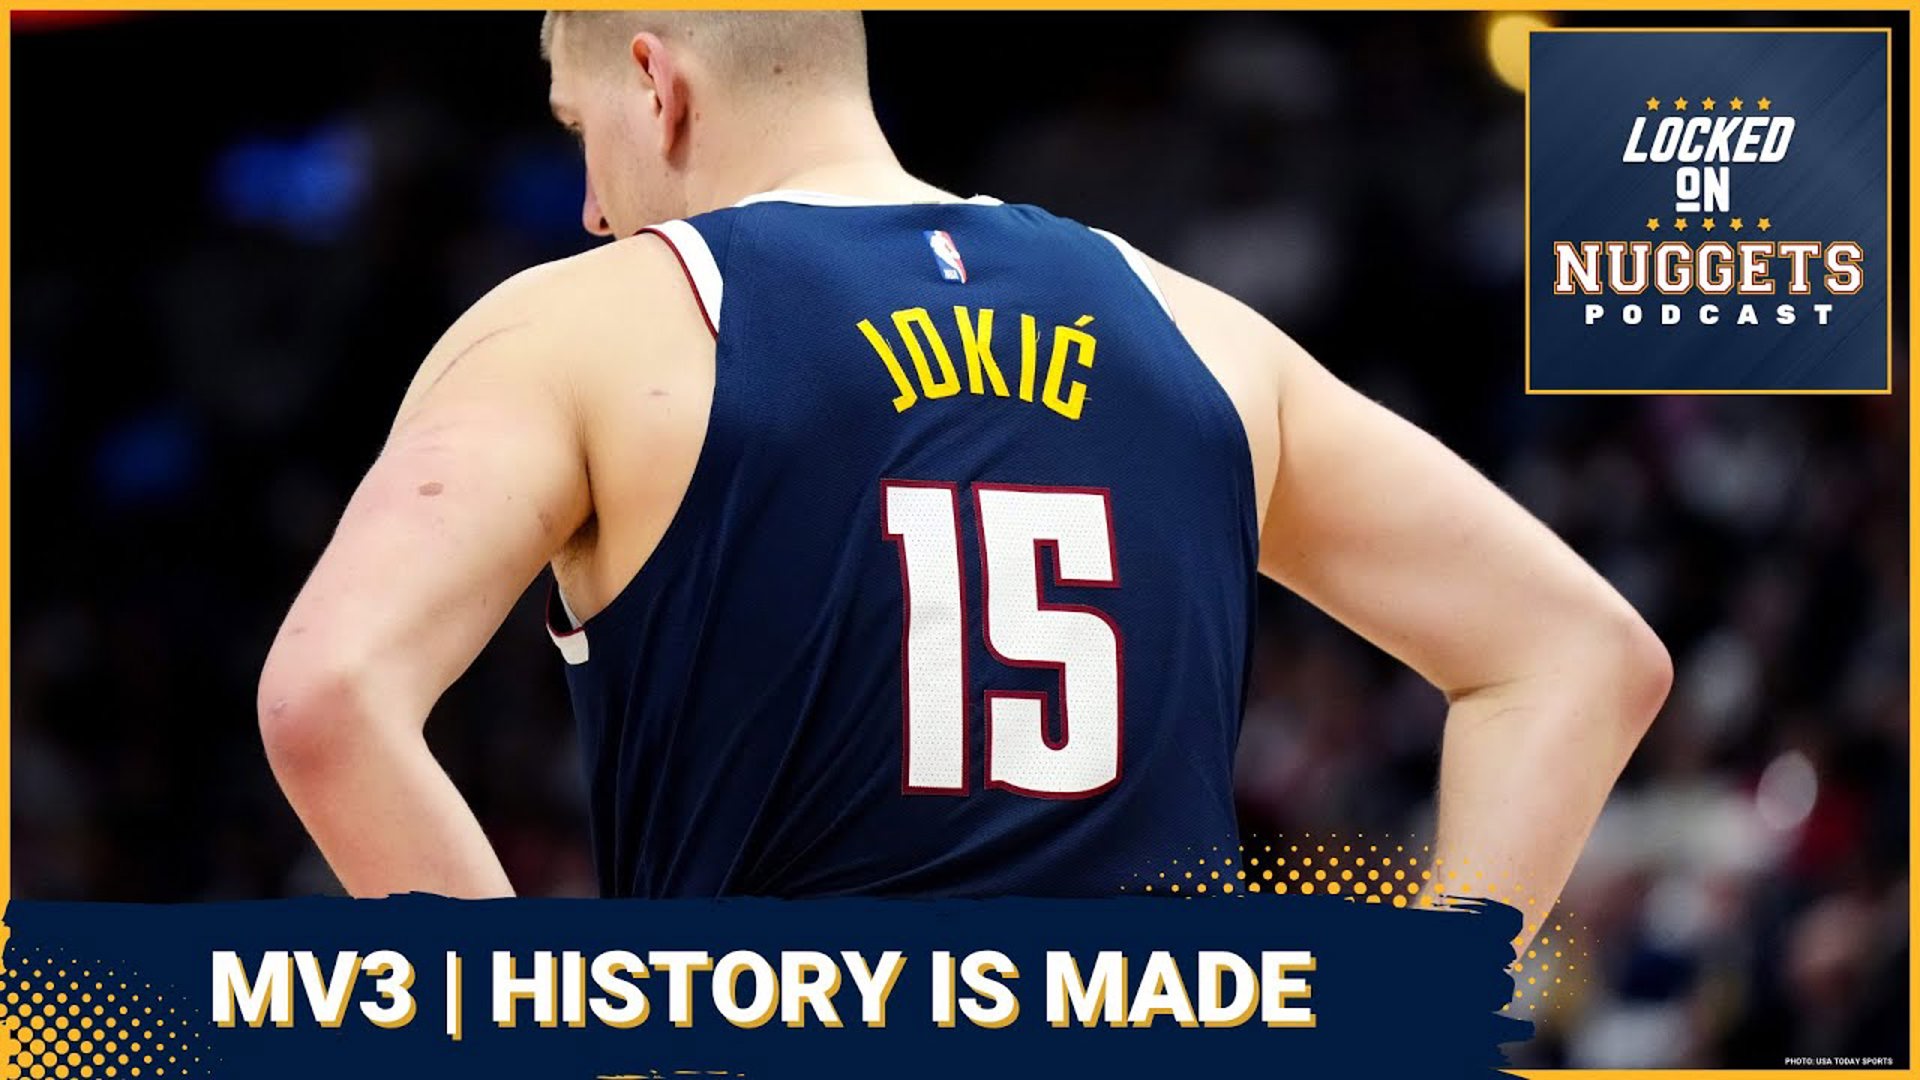 Nikola Jokic has won his 3rd MVP in the last 4 years and he has entered an all-time great tier.